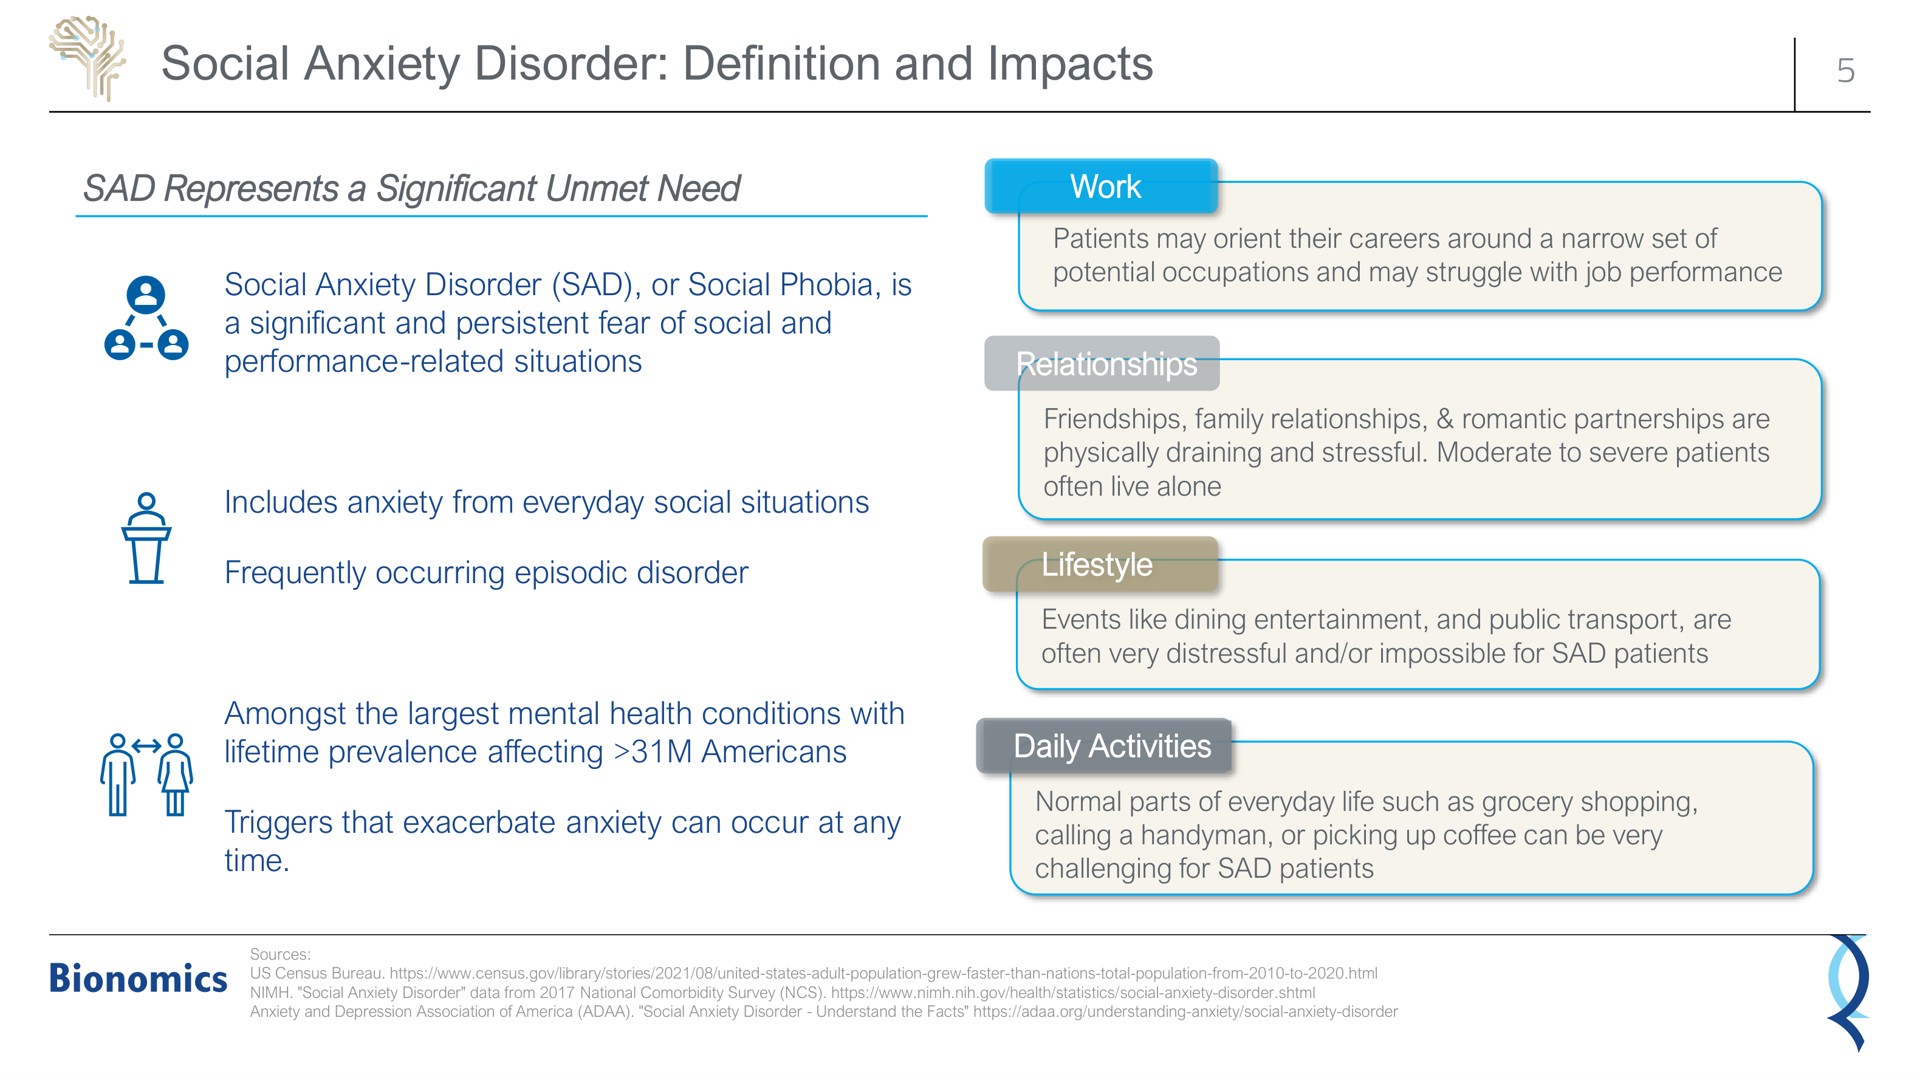 social anxiety disorder definition and impacts | Bionomics